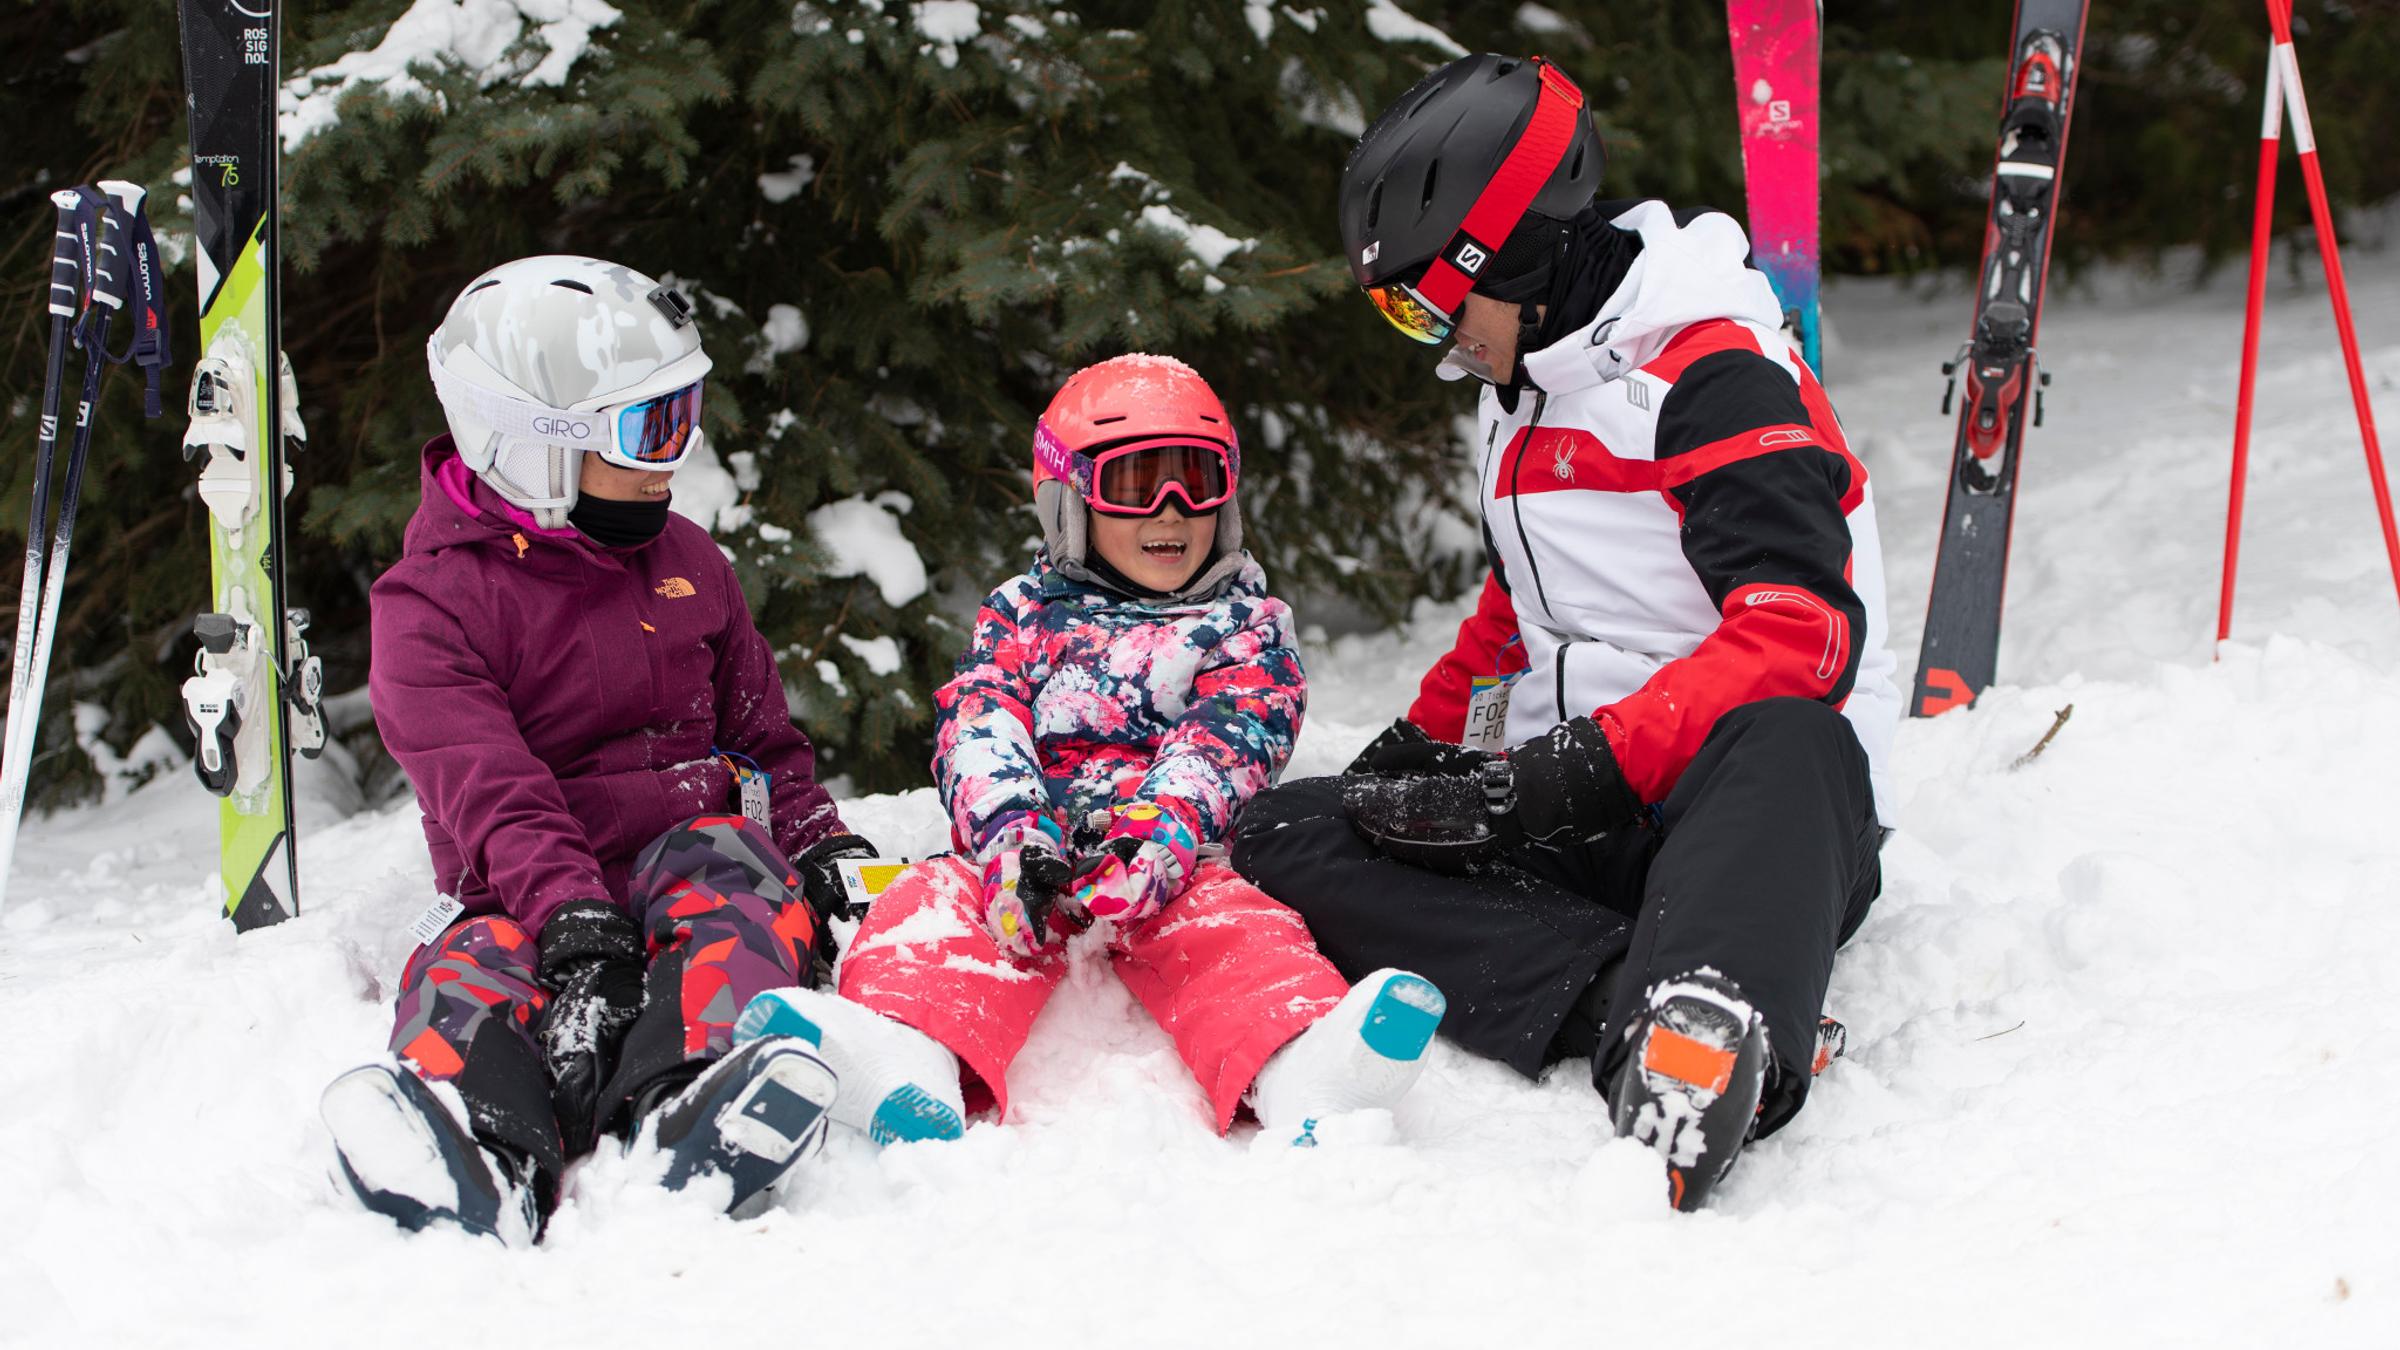 Winter lifestyle - individuals, couples and families interacting in ski and snowboard gear